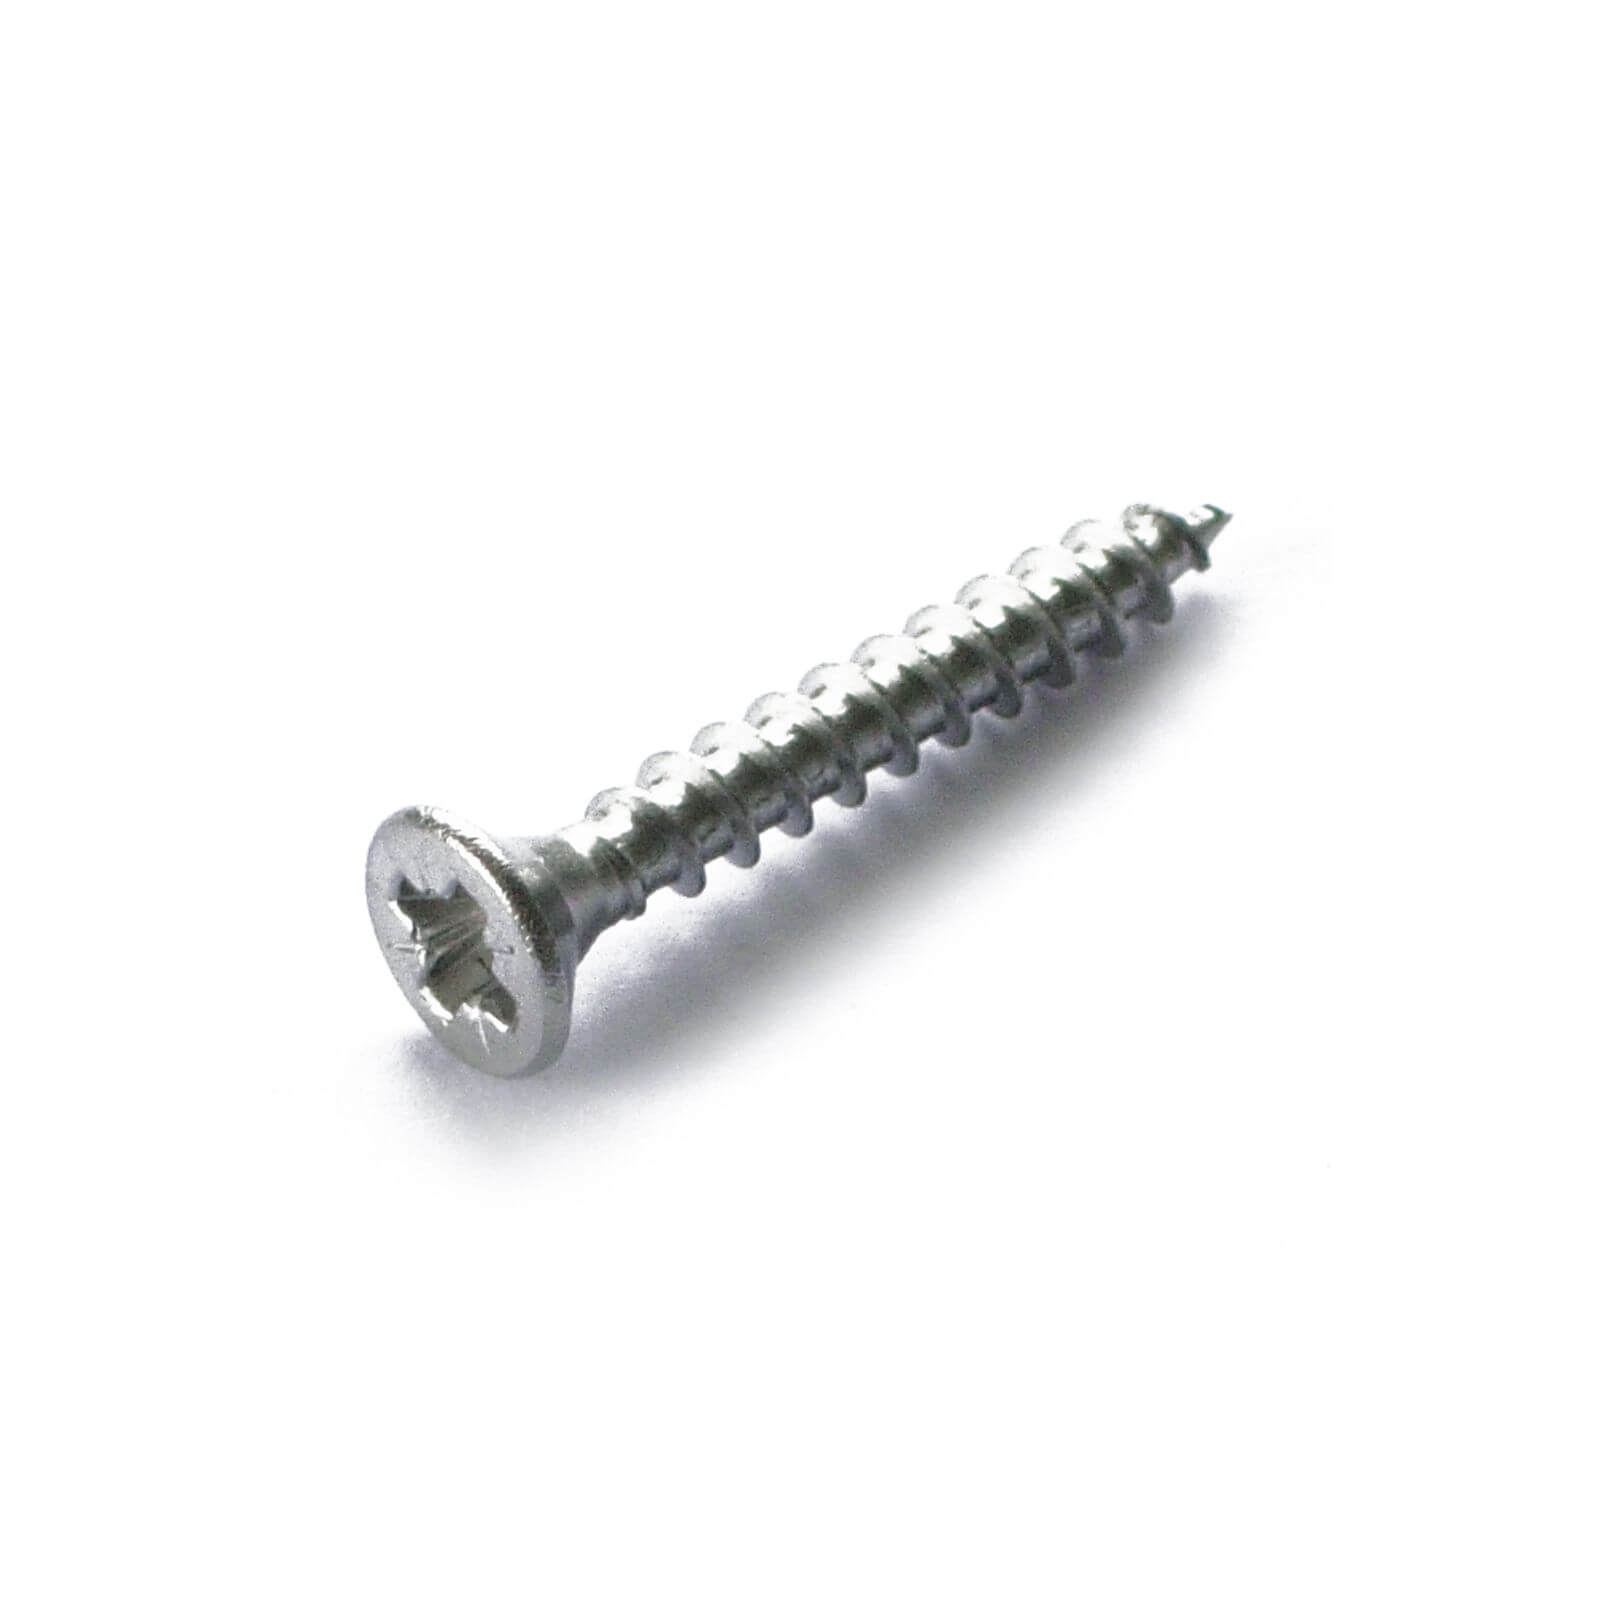 Single Thread Screw - Stainless Steel - 5 x 50mm - 25 Pack